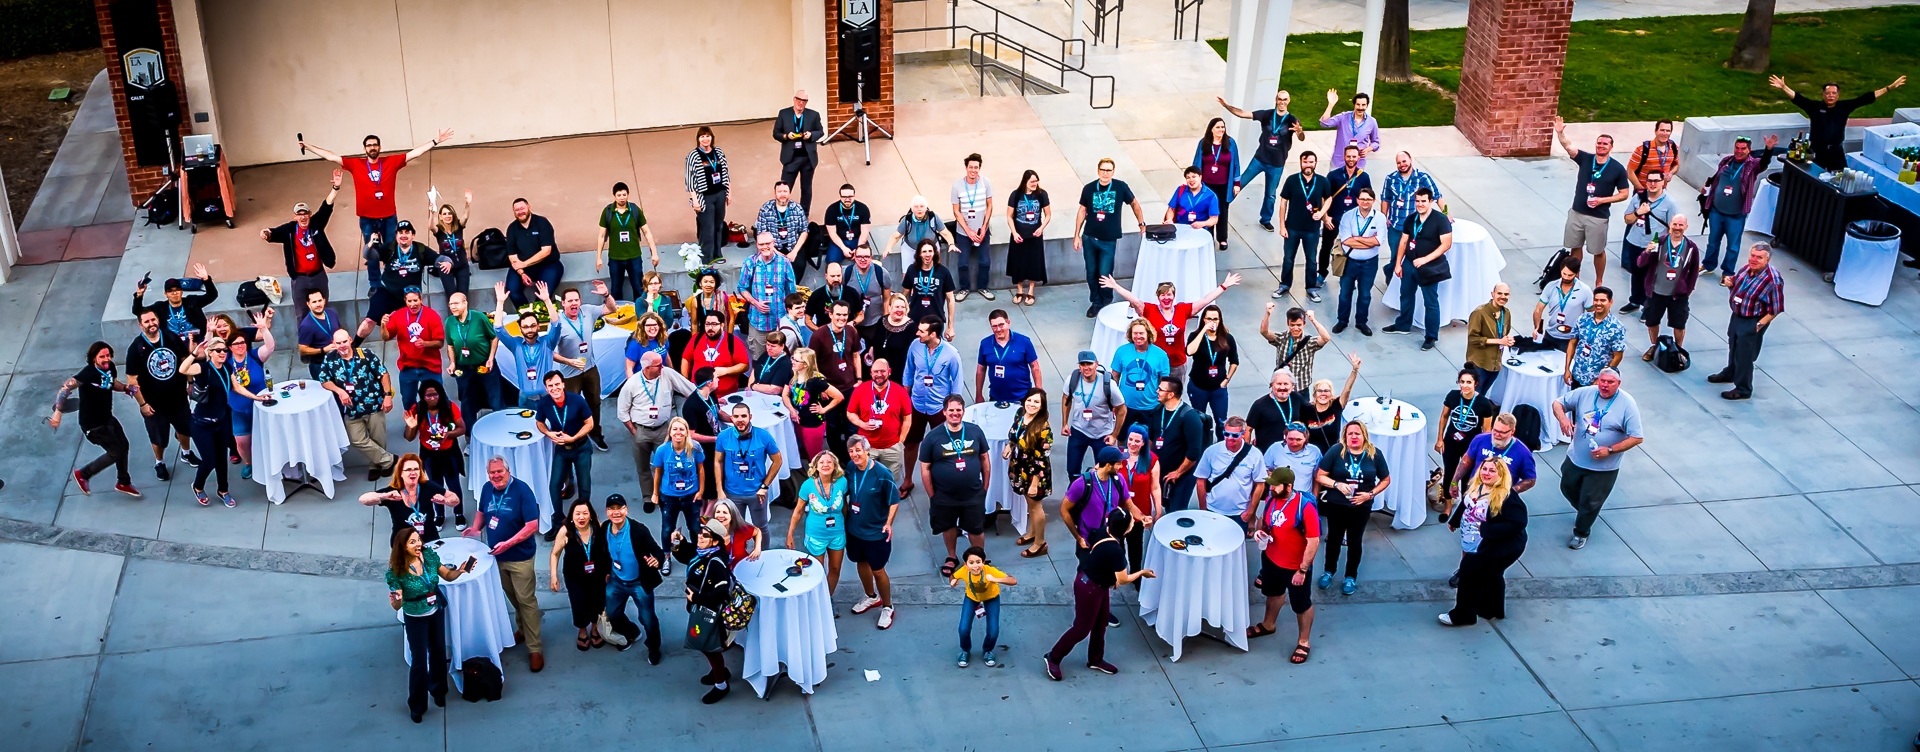 WordCamp Los Angeles 2017 attendees at the after party at Cal State LA. Wide group photo taken from a balcony above.